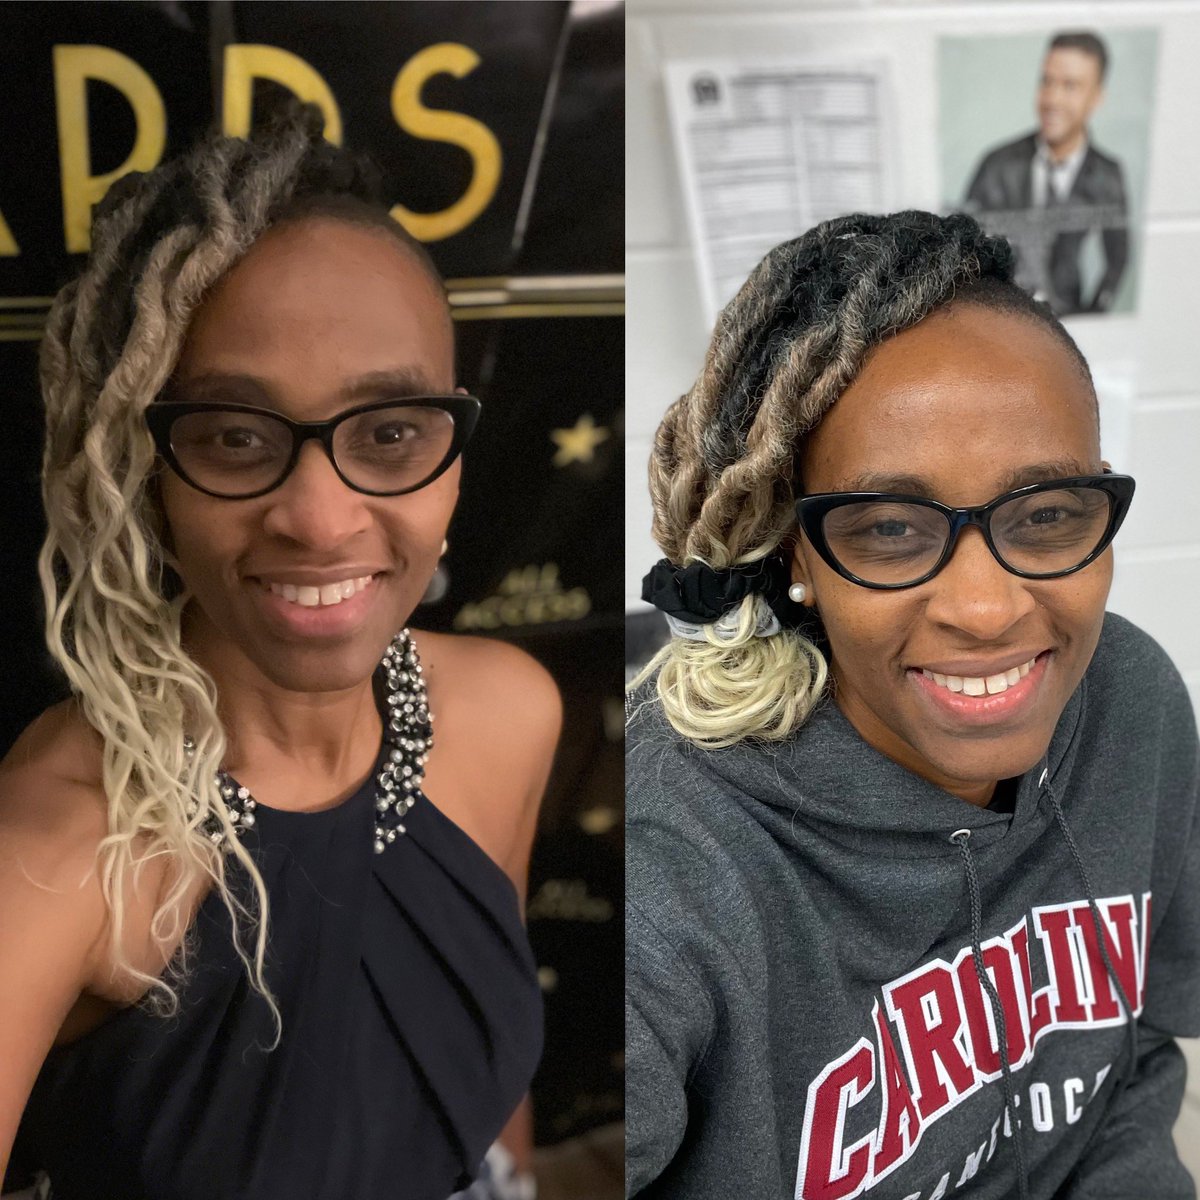 When you go from #Glam @ your #OscarNightParty (by @tja1499 ✨) to #TeacherComfortable in your #SciClassroom reppin’ your alma mater (including sweatpants) during a much-needed #TeacherPlanningDay!  @NNPSWoodside  @UofSC @TheAcademy #StillSmiling #YesIAmTired #ItWasWorthIt ✨🎬🤩